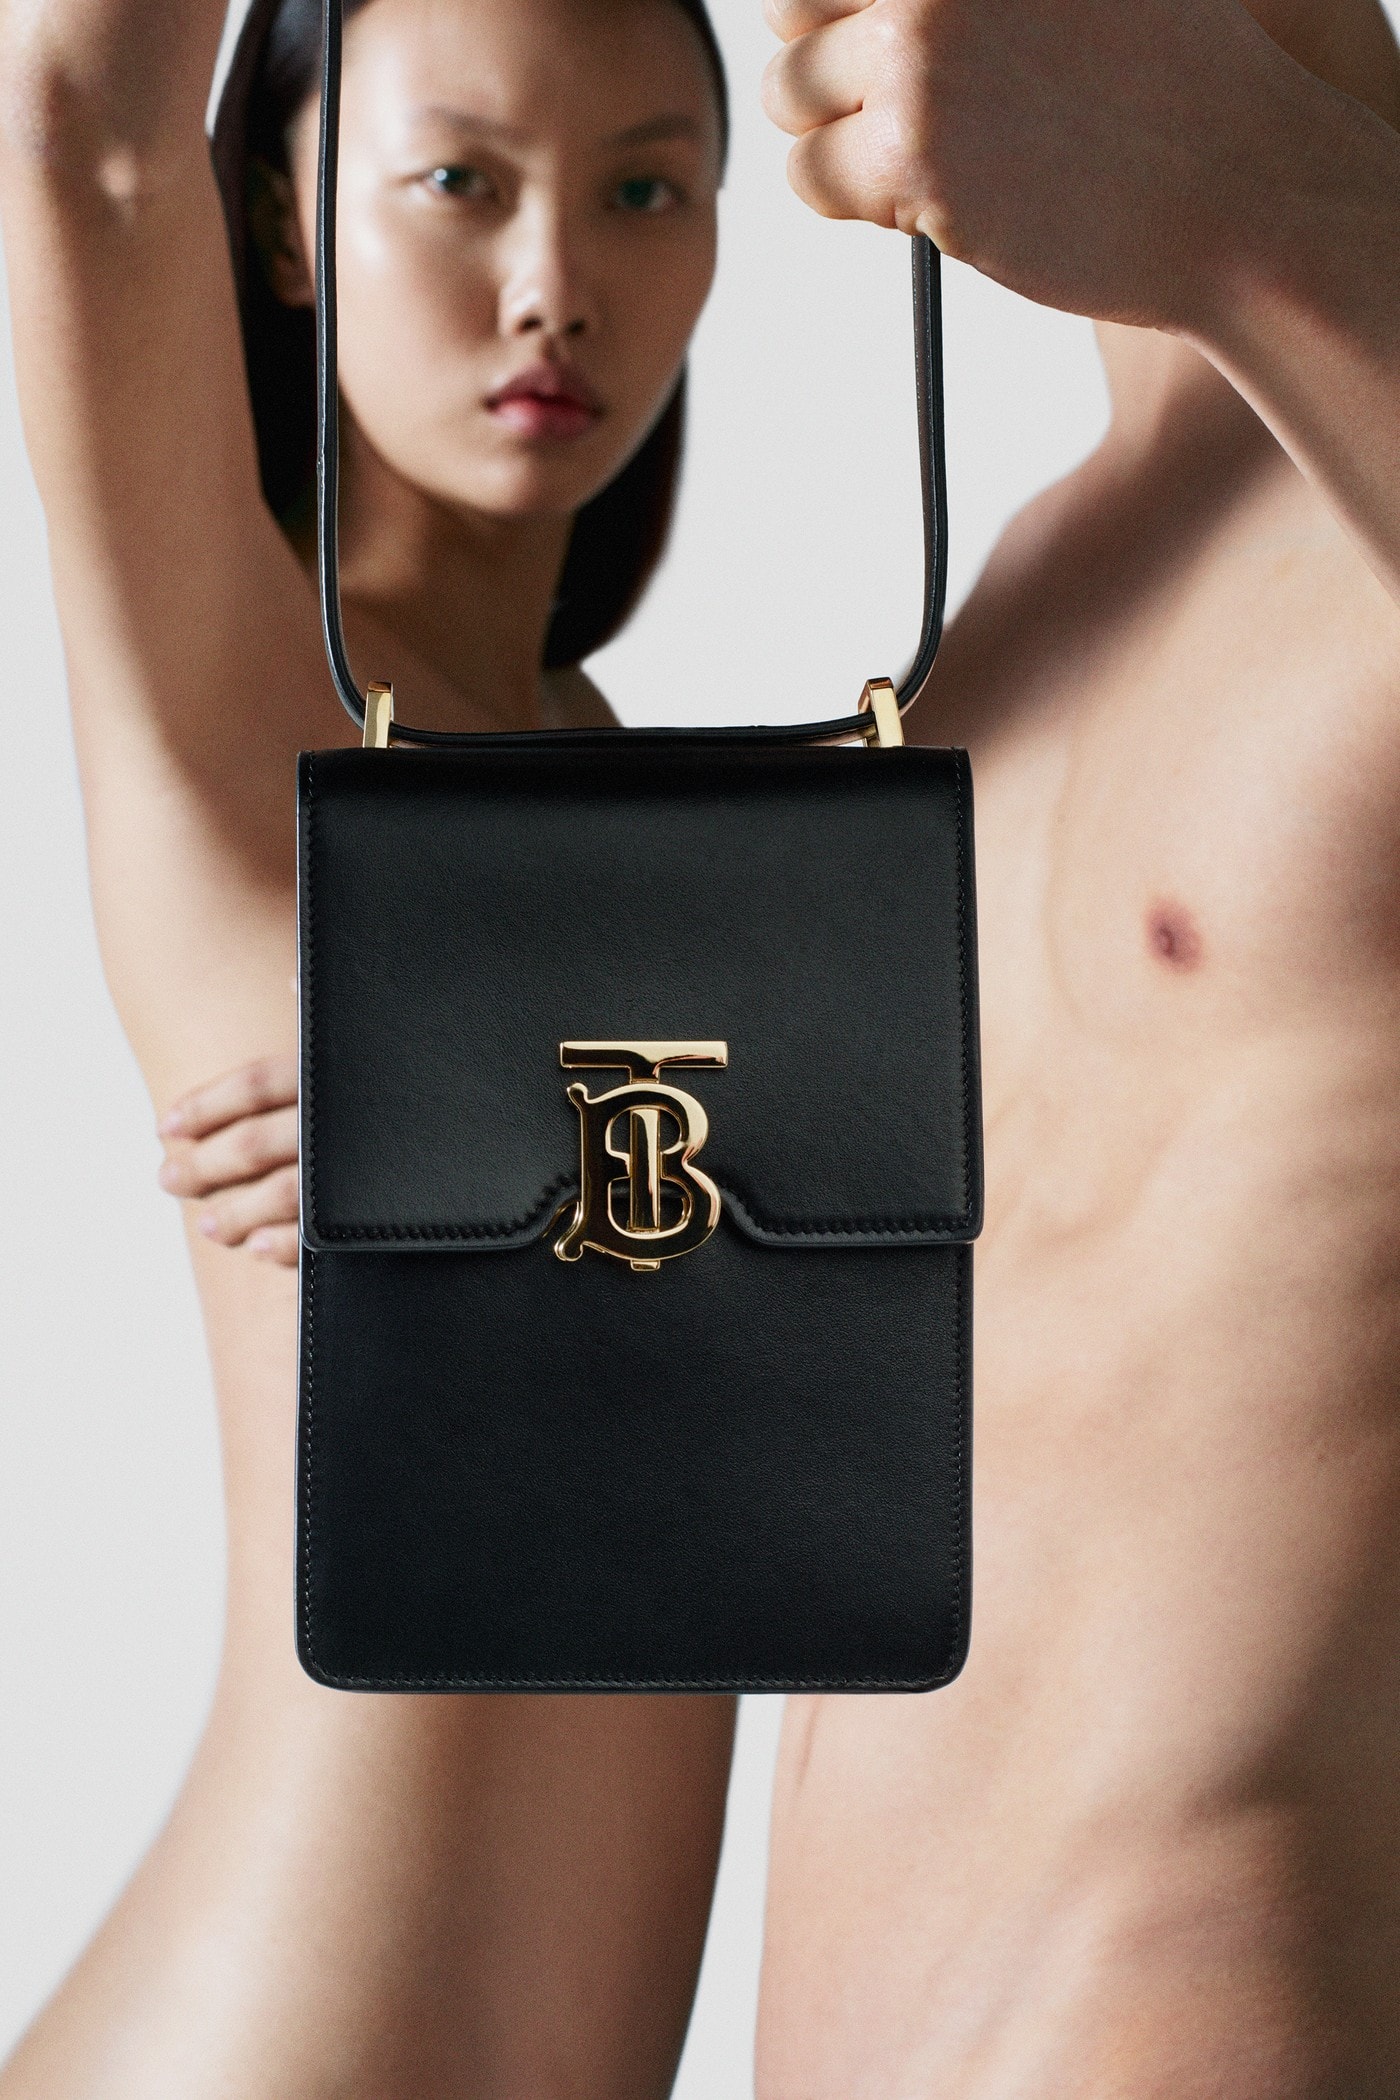 burberry b series robin bag release campaign